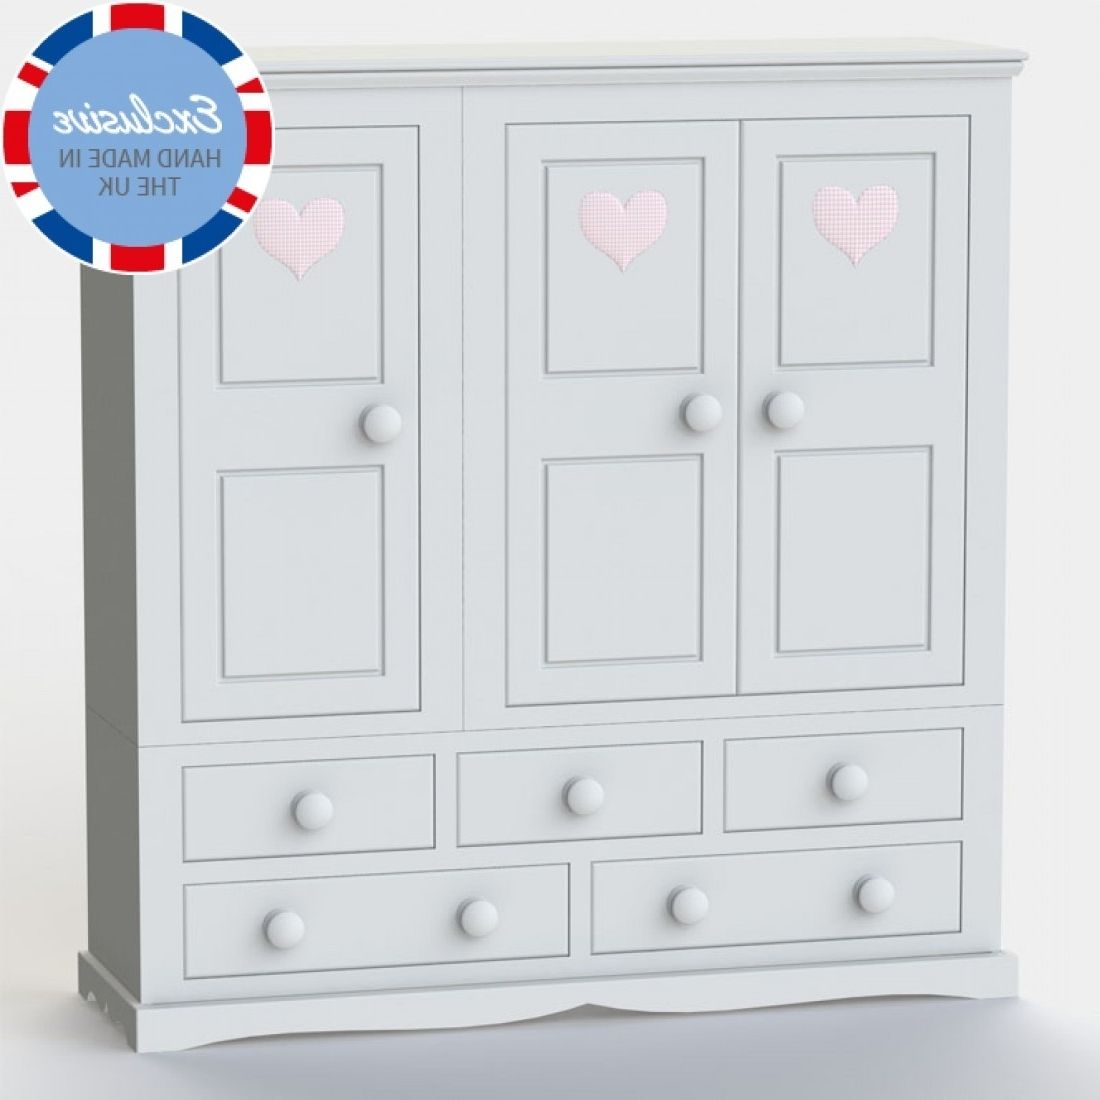 Wardrobes And Chest Of Drawers Combined Regarding Most Up To Date Luxury Childrens Wardrobe And Chest Of Drawers – Badotcom (View 3 of 15)